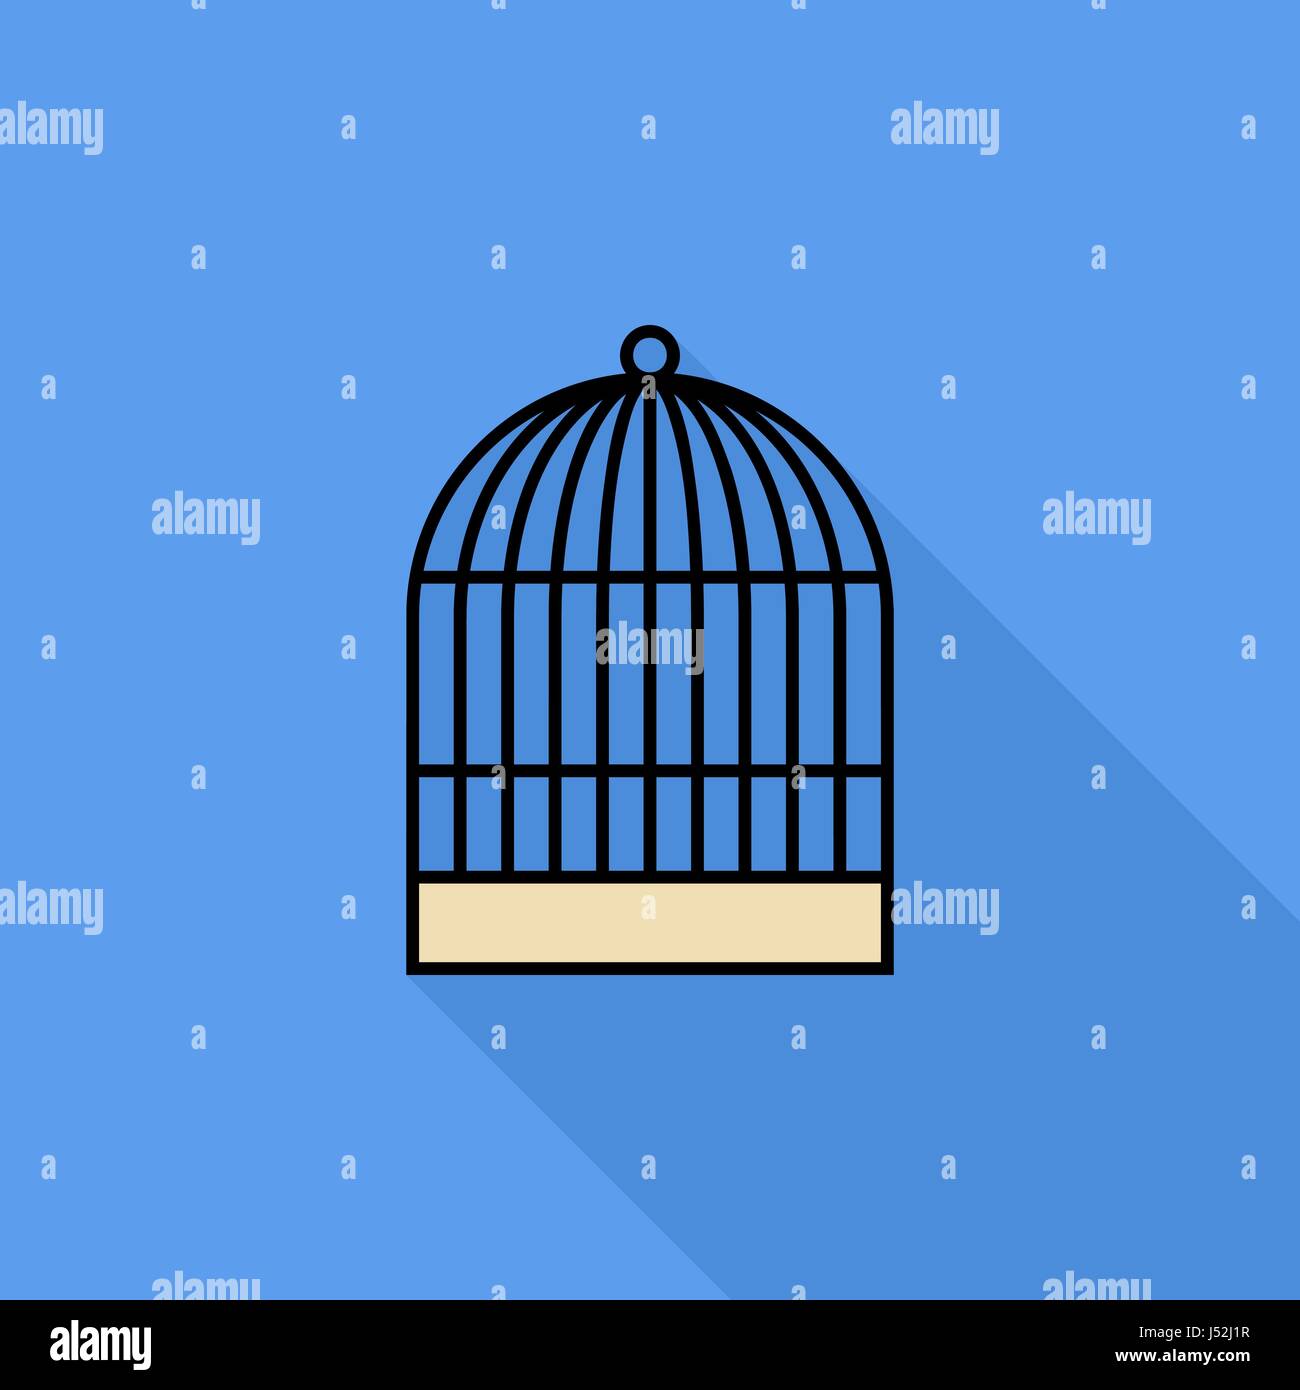 Silhouette Birdcage High Resolution Stock Photography and Images - Alamy